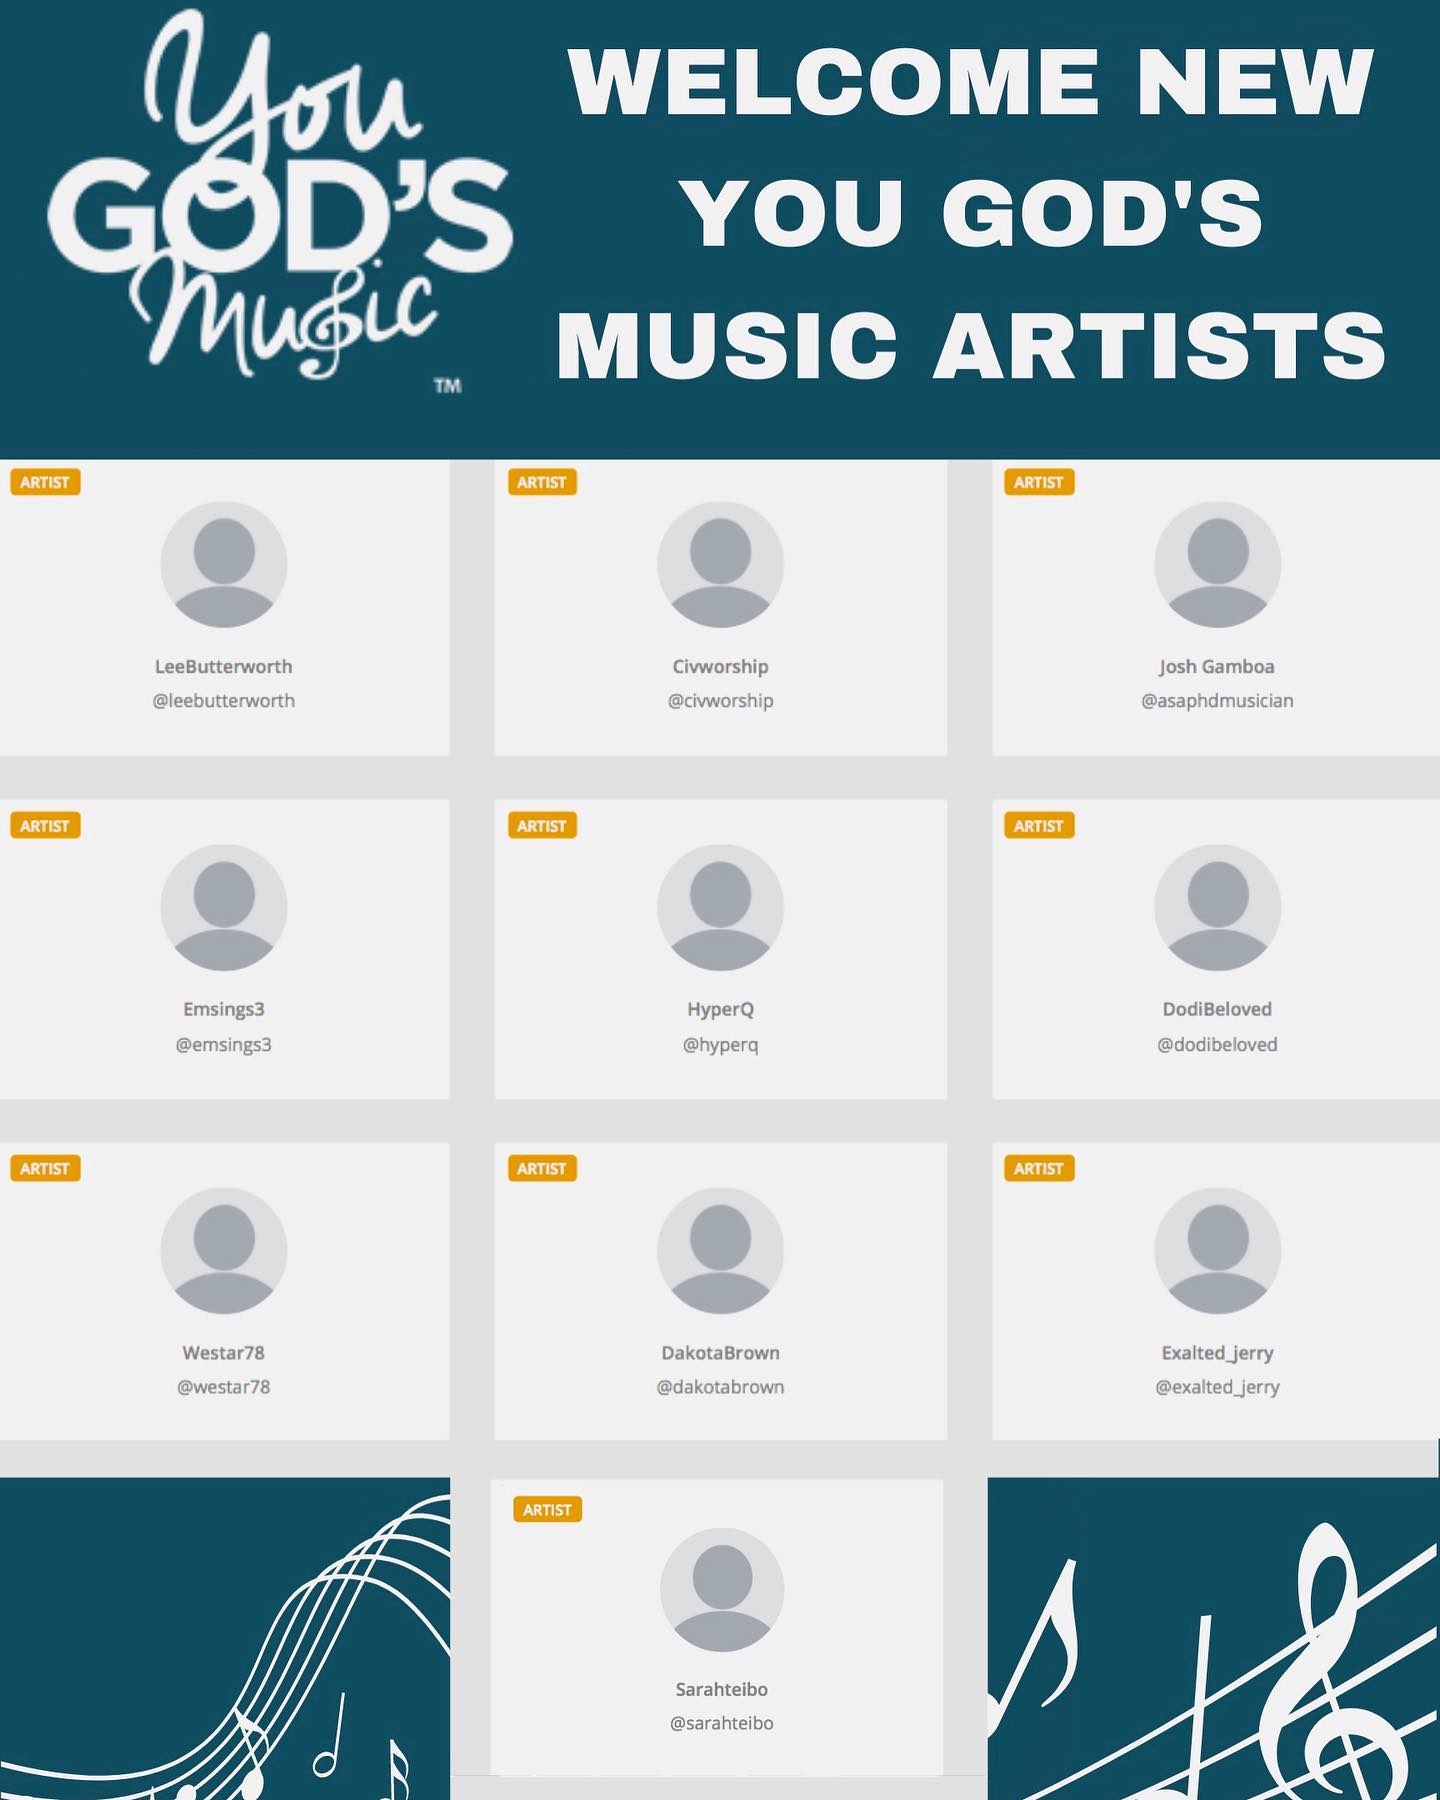 YGM would like to welcome ten new artists into the community!